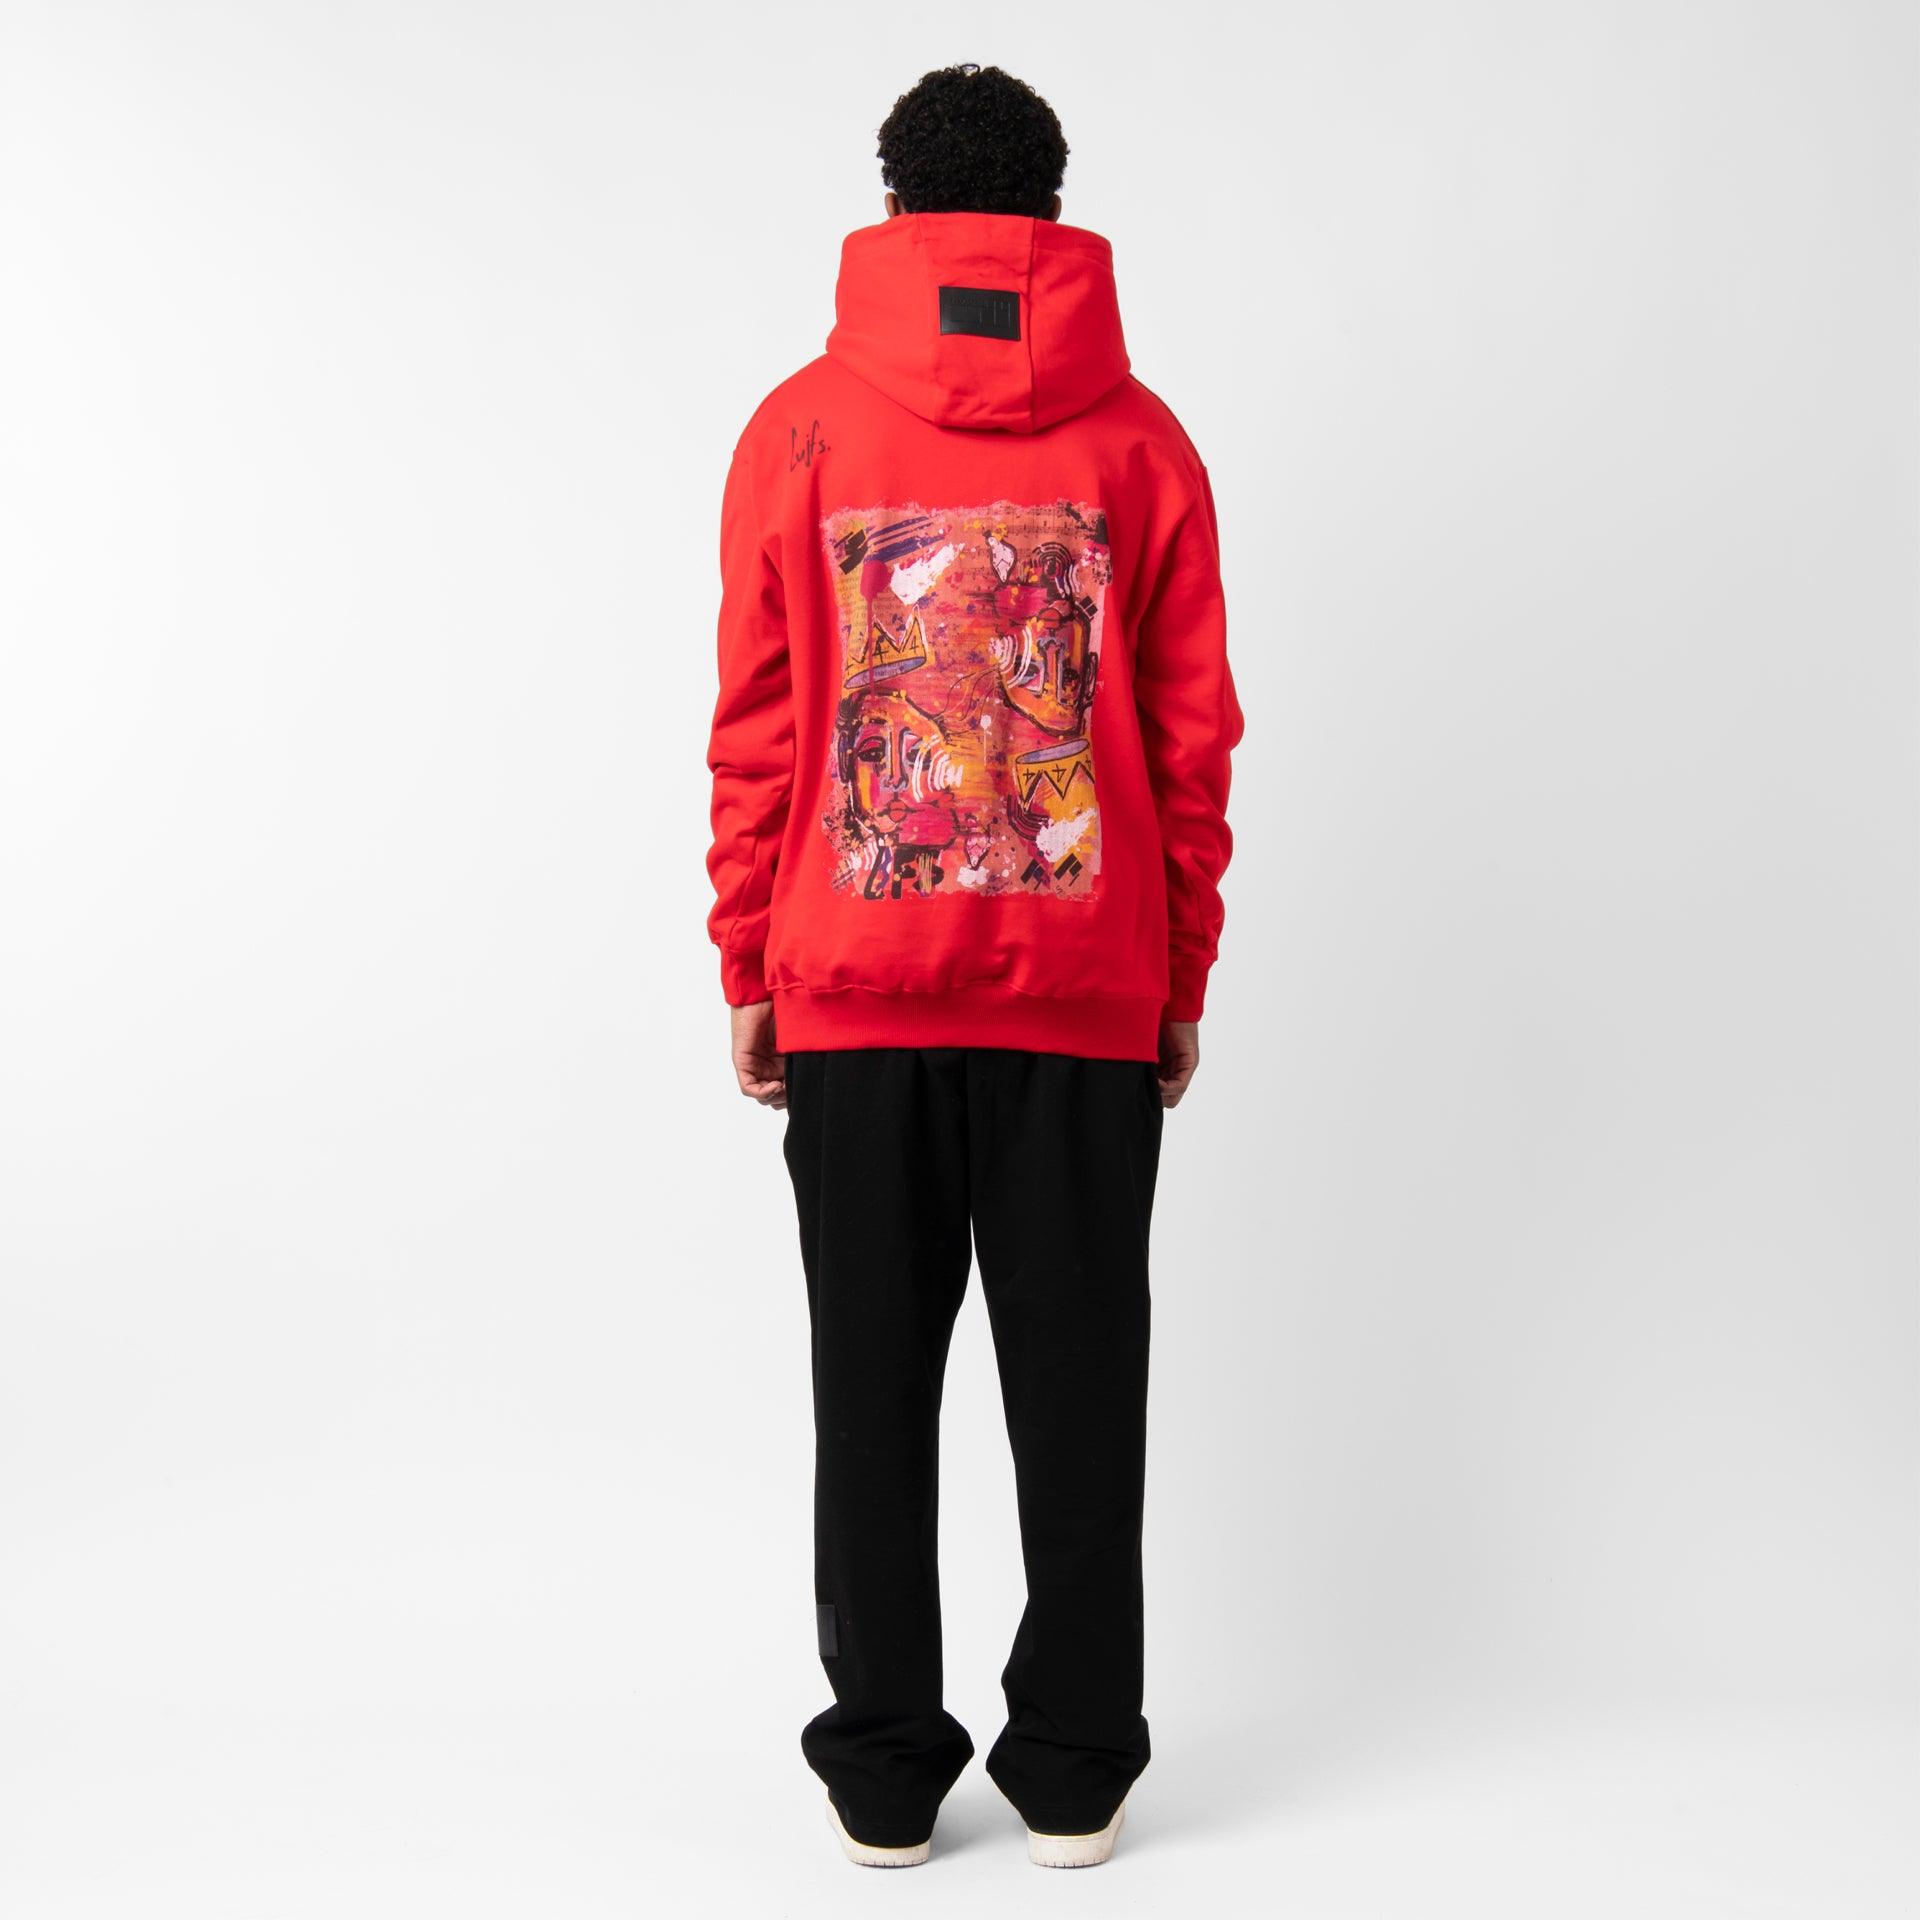 Red Hoodie From Tripe Four - WECRE8